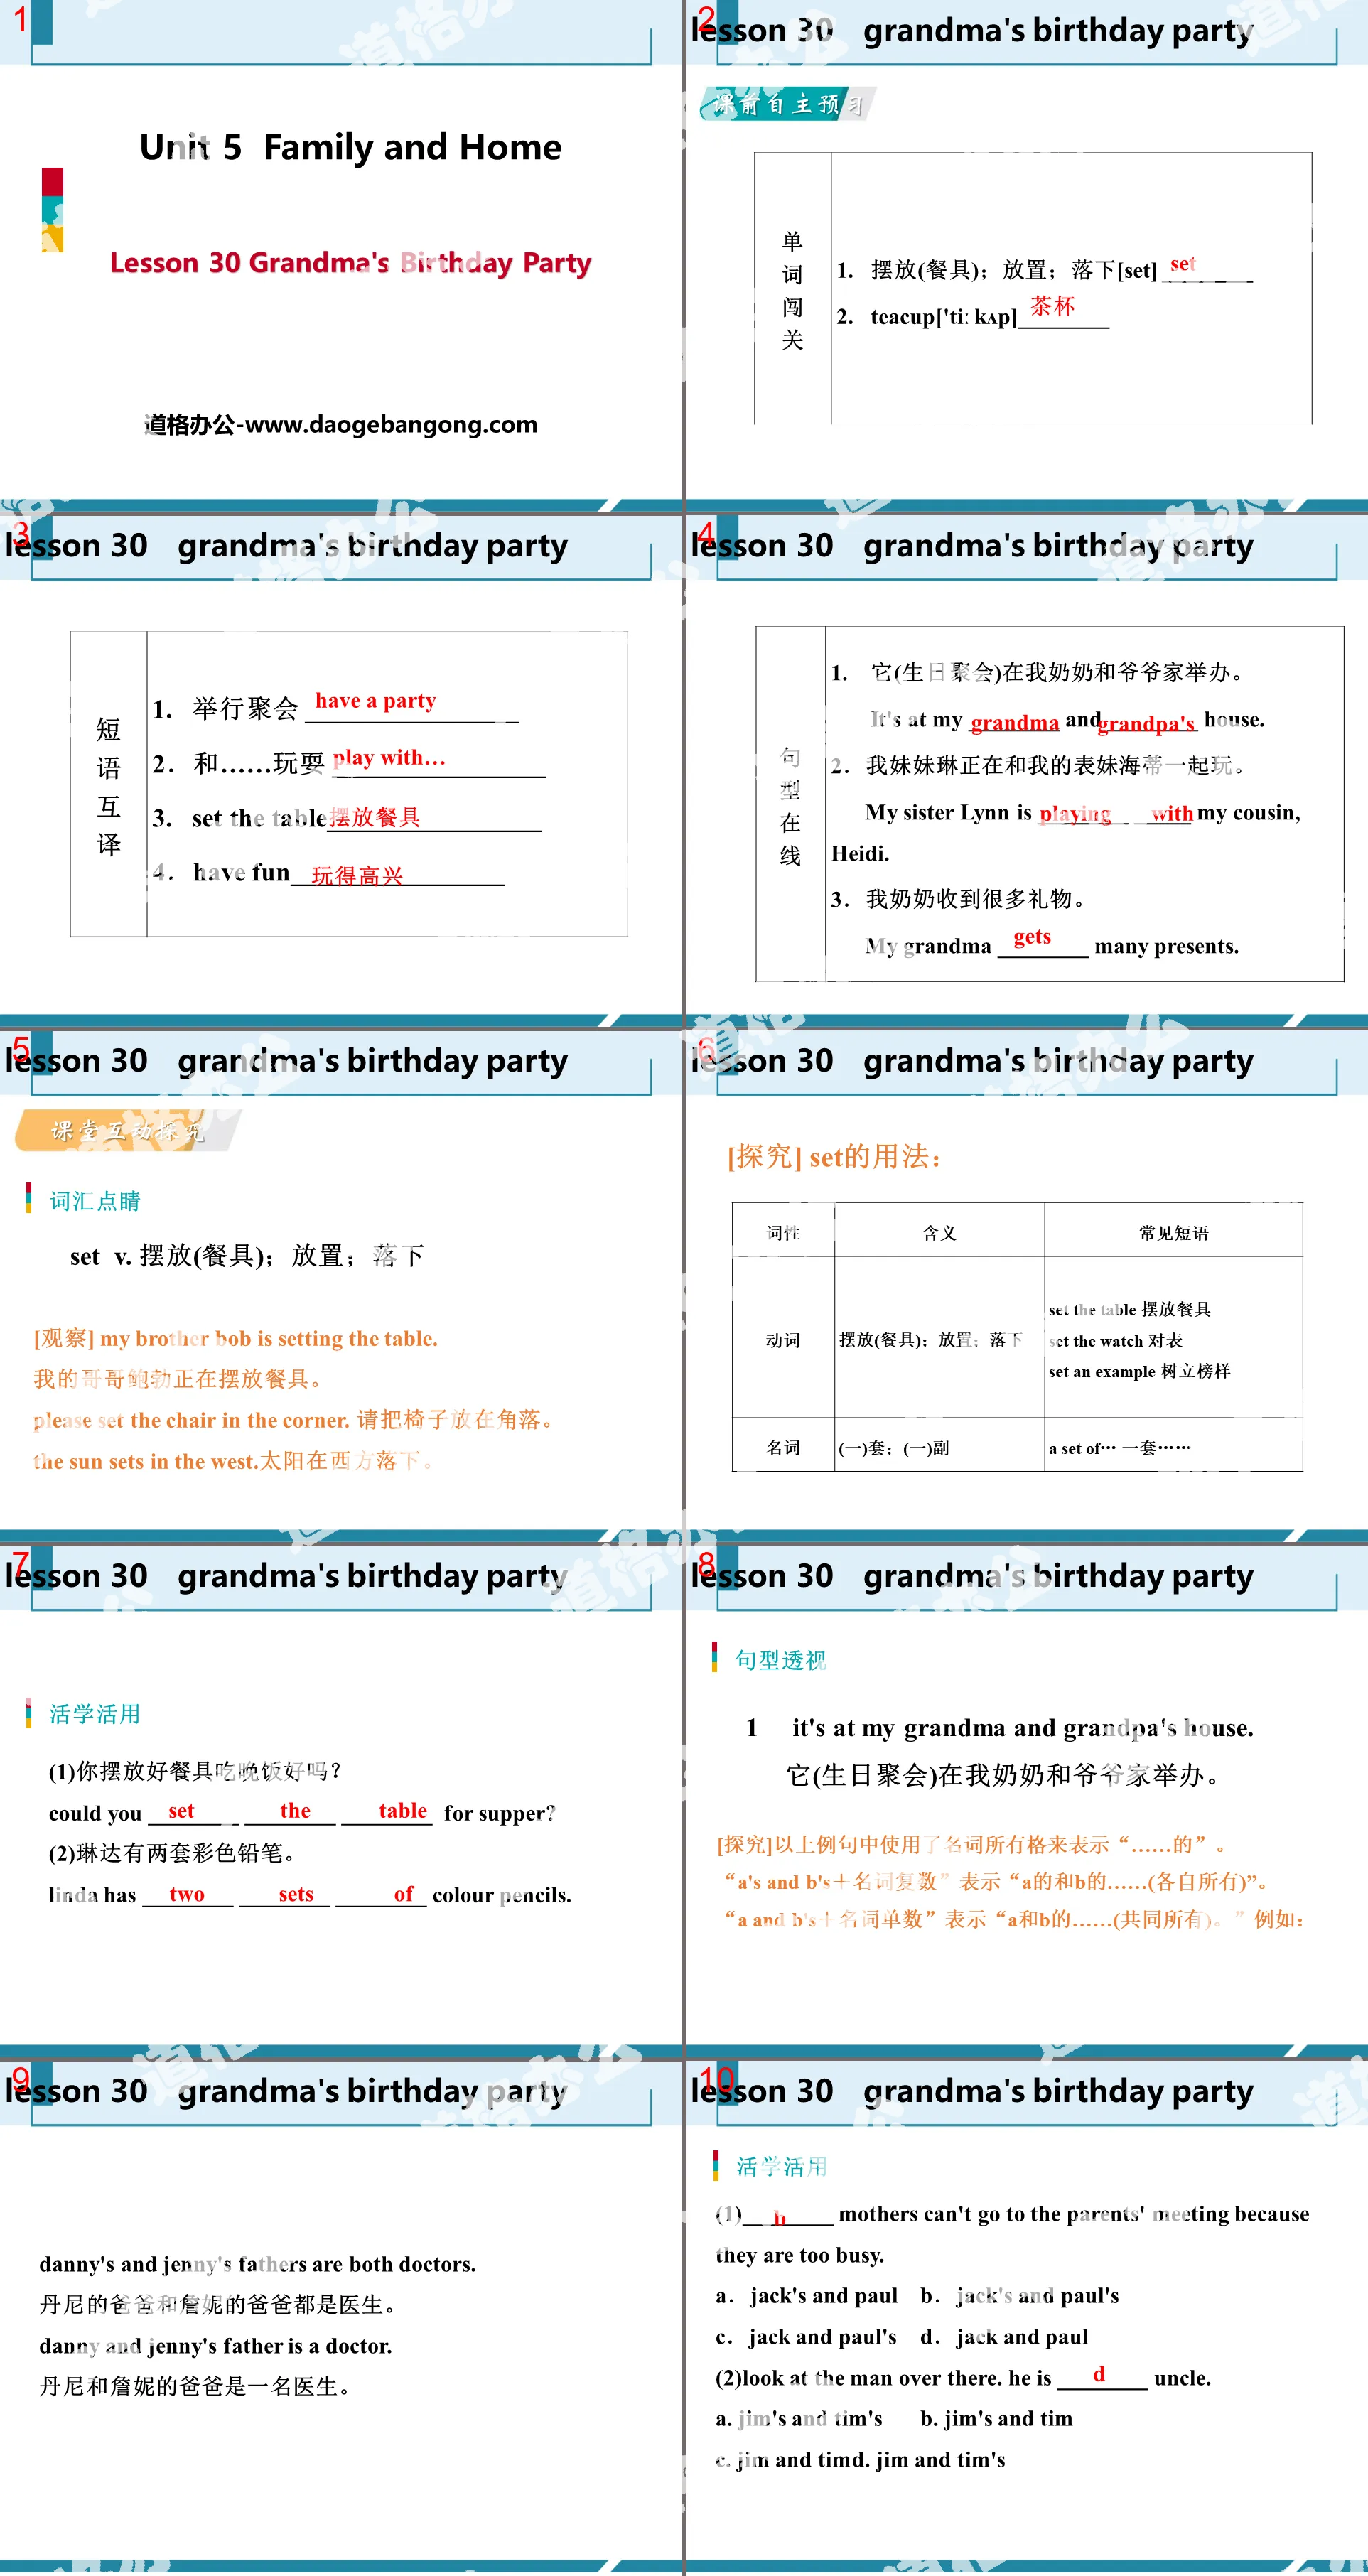 《Grandma's Birthday Party》Family and Home PPT課件下載